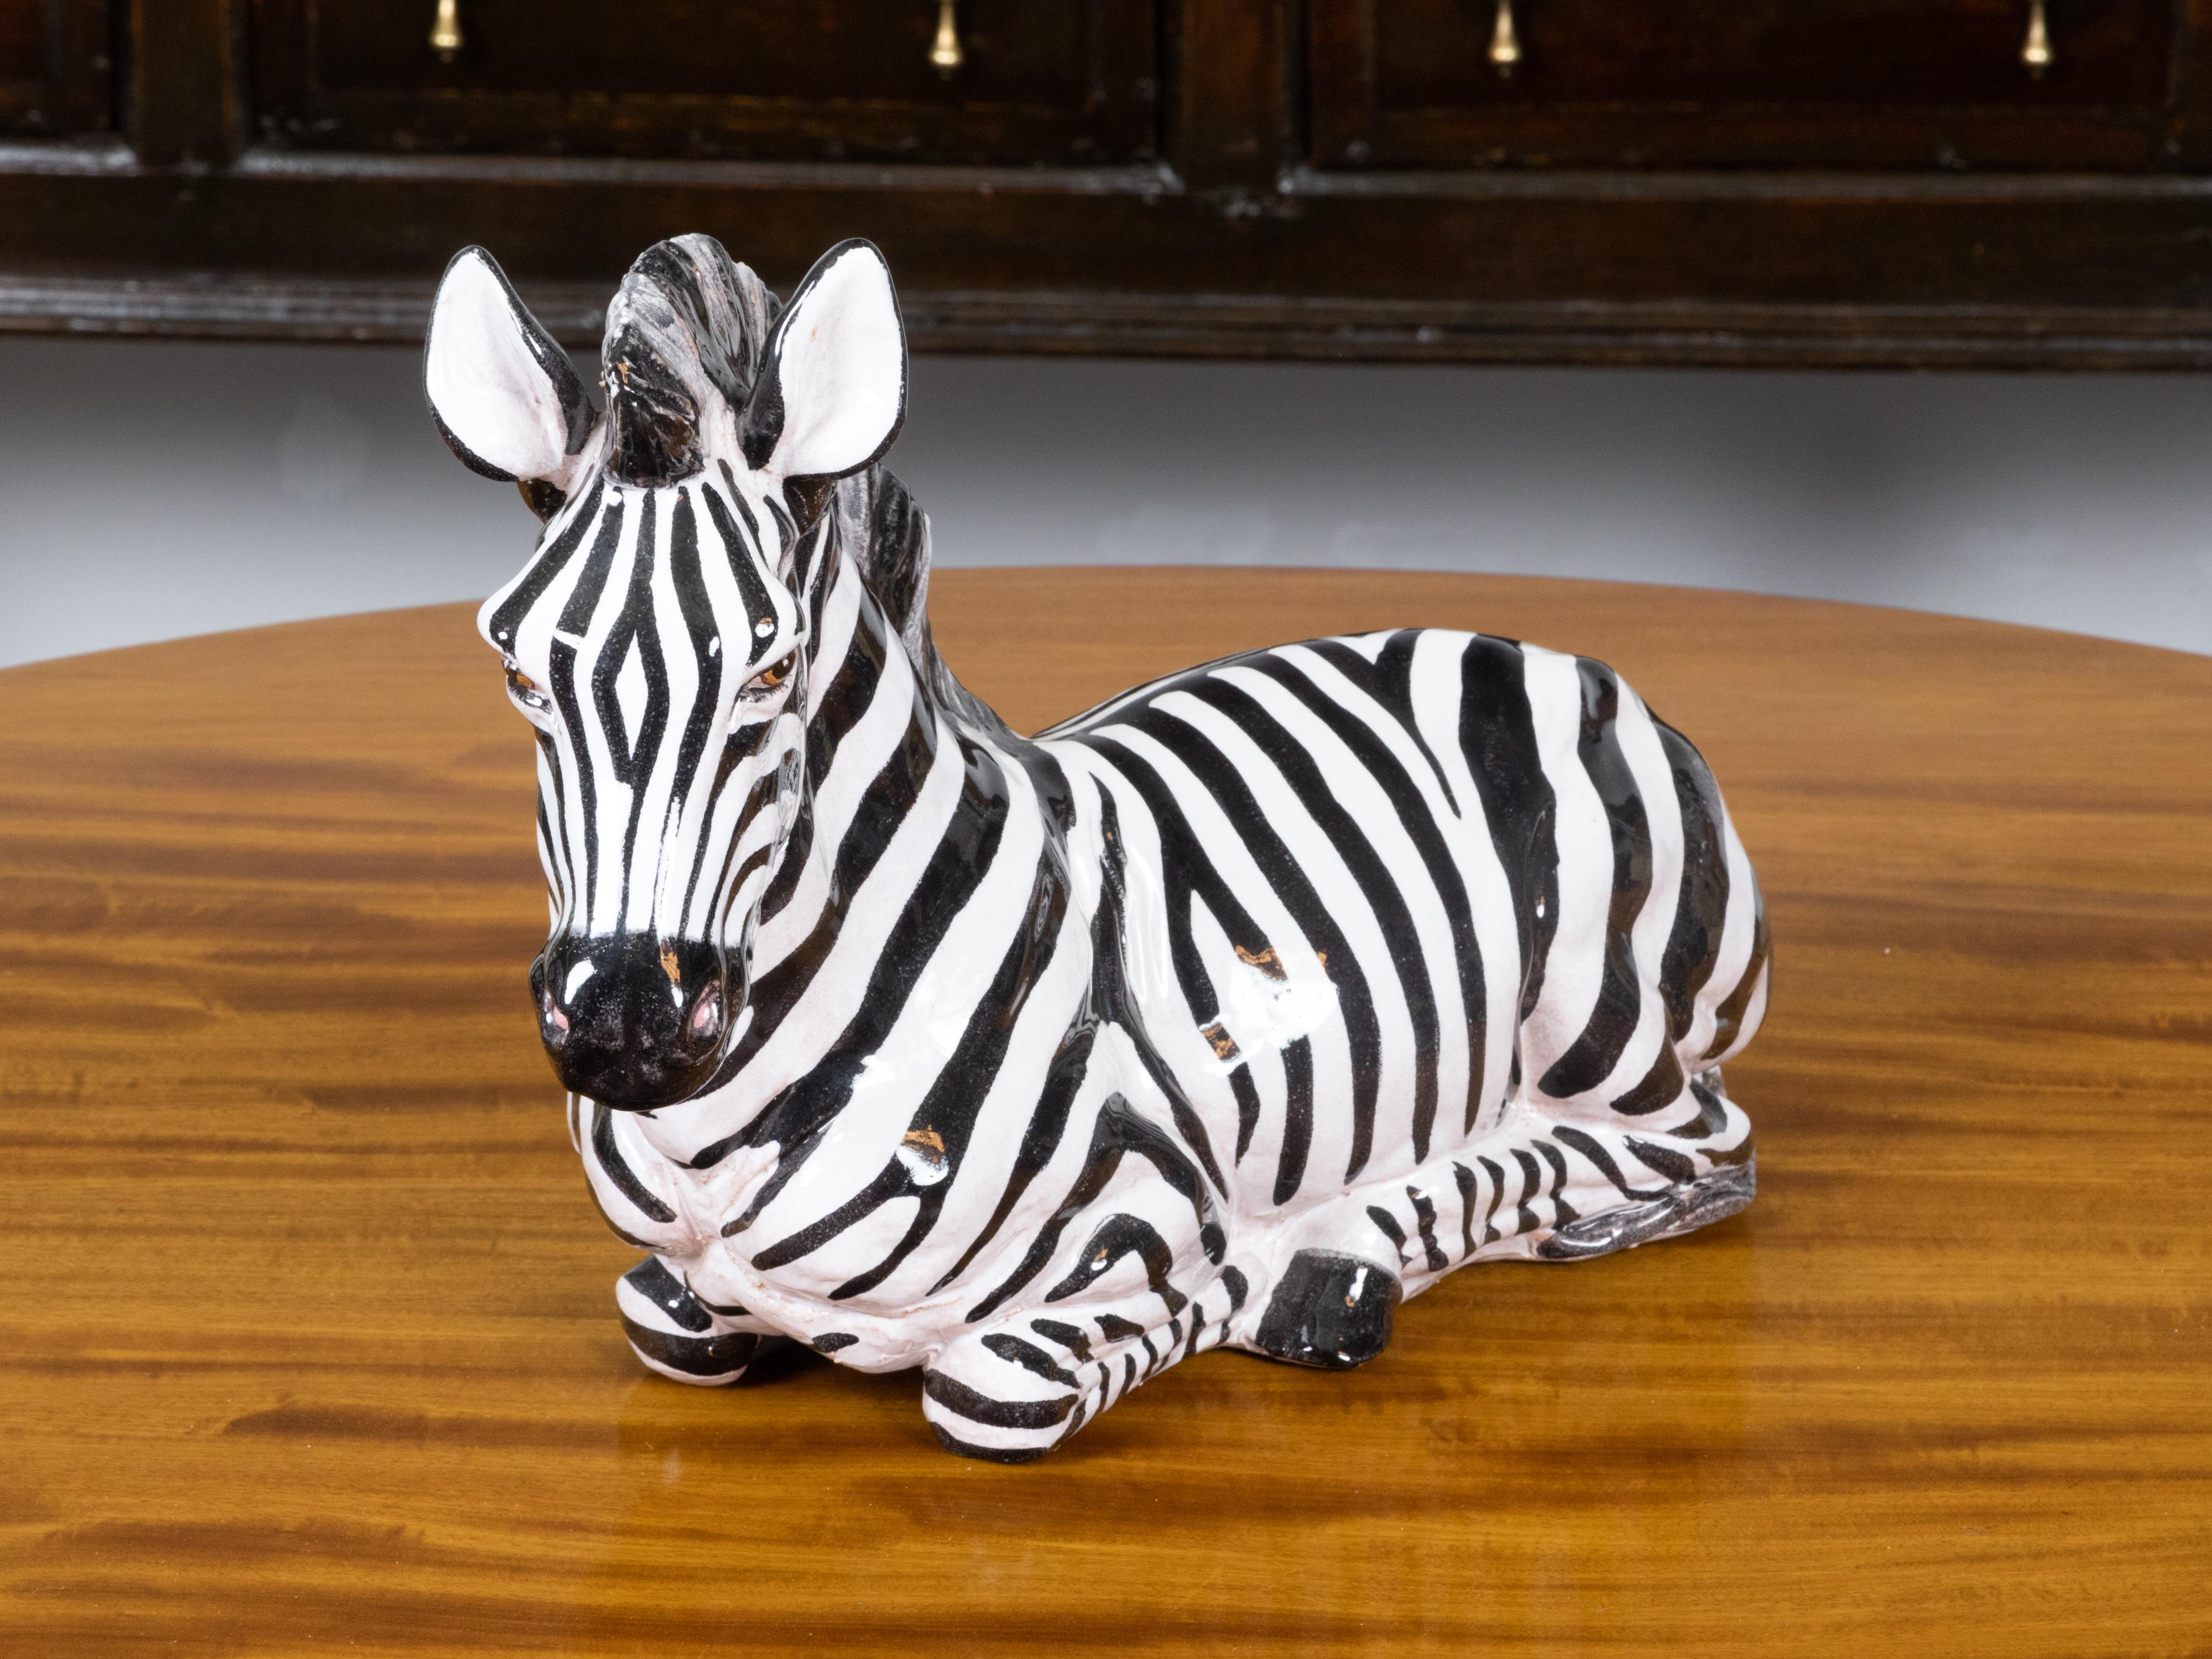 A small vintage Italian hand painted terracotta animal sculpture depicting a zebra lying on the ground, with brown eyes. Created in Italy during the 20th century, this painted terracotta sculpture charms us with its delicate depiction of a zebra